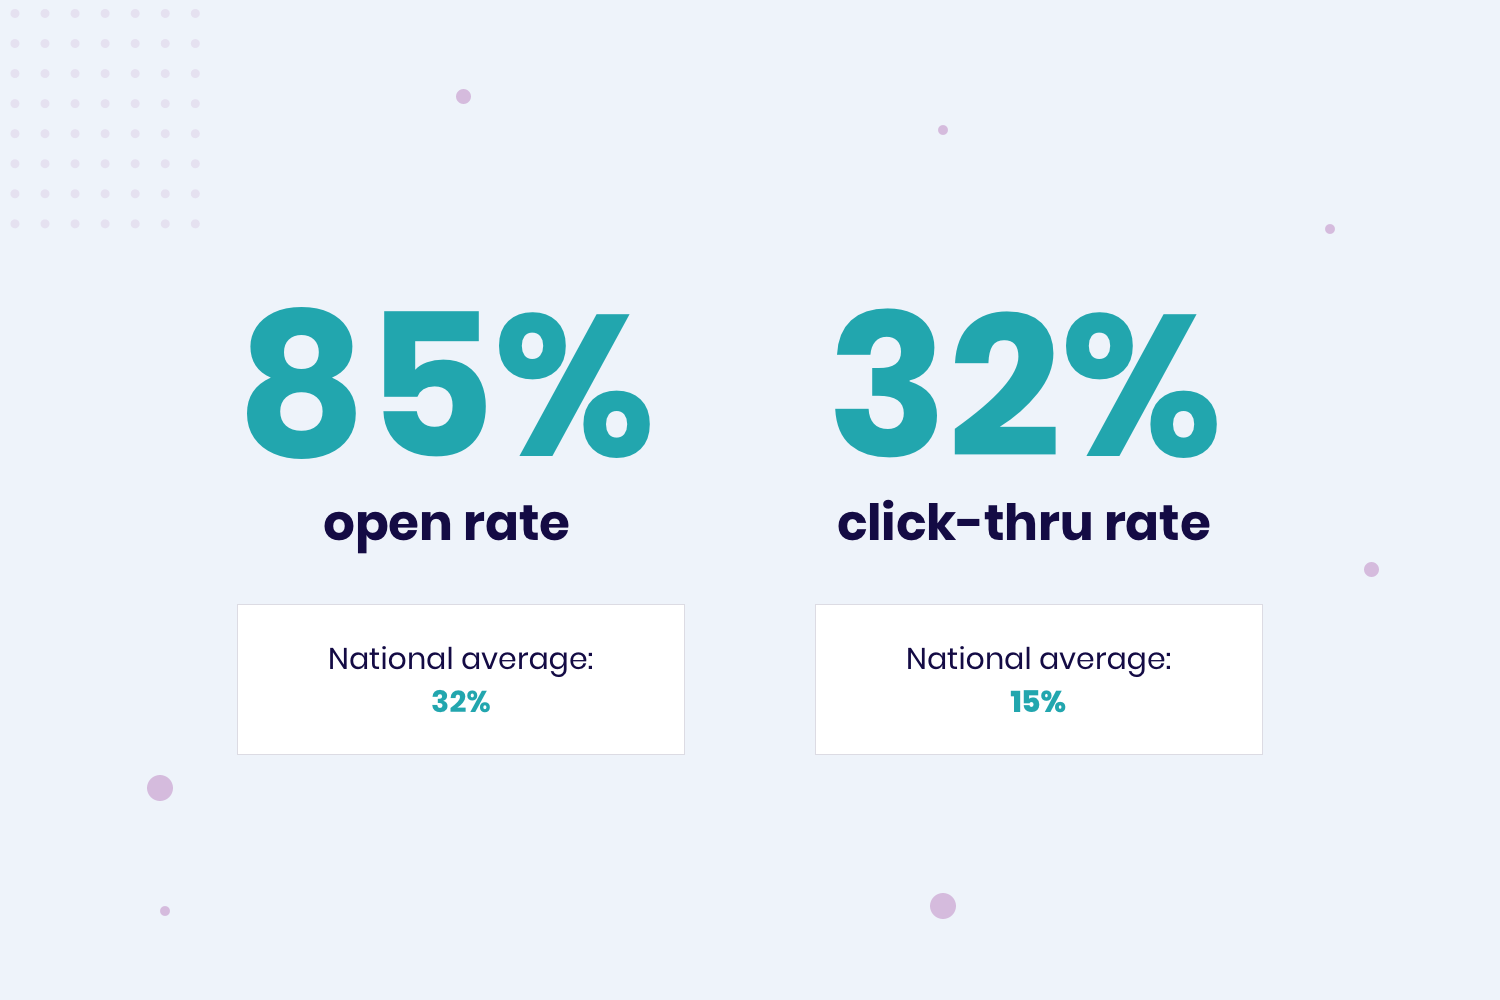 Improved open and click-thru rate